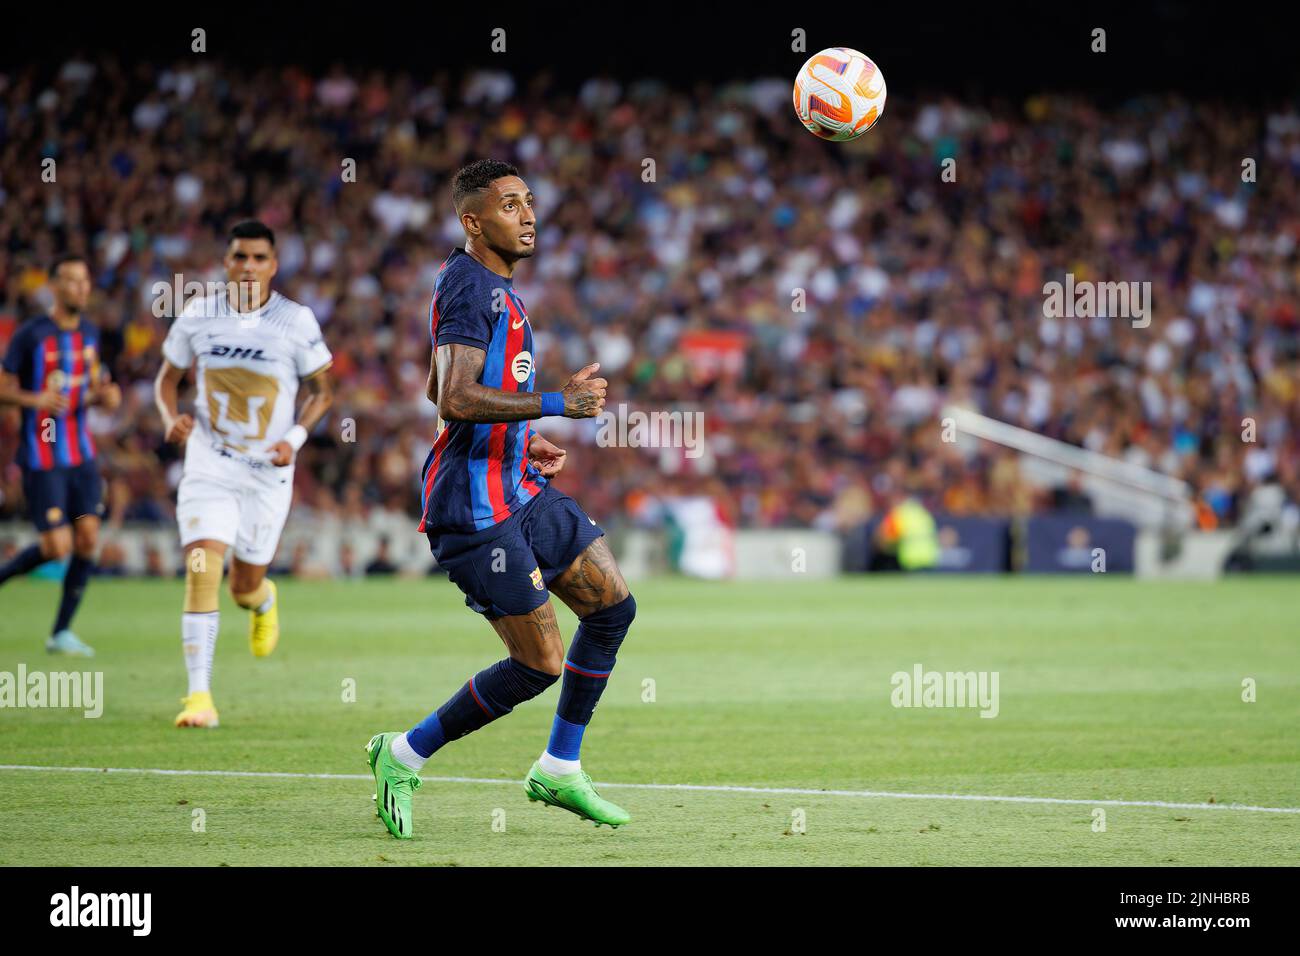 BARCELONA - AUG 7: Raphinha in action during the Joan Gamper Throphy match between FC Barcelona and Pumas at the Camp Nou Stadium on August 7, 2022 in Stock Photo